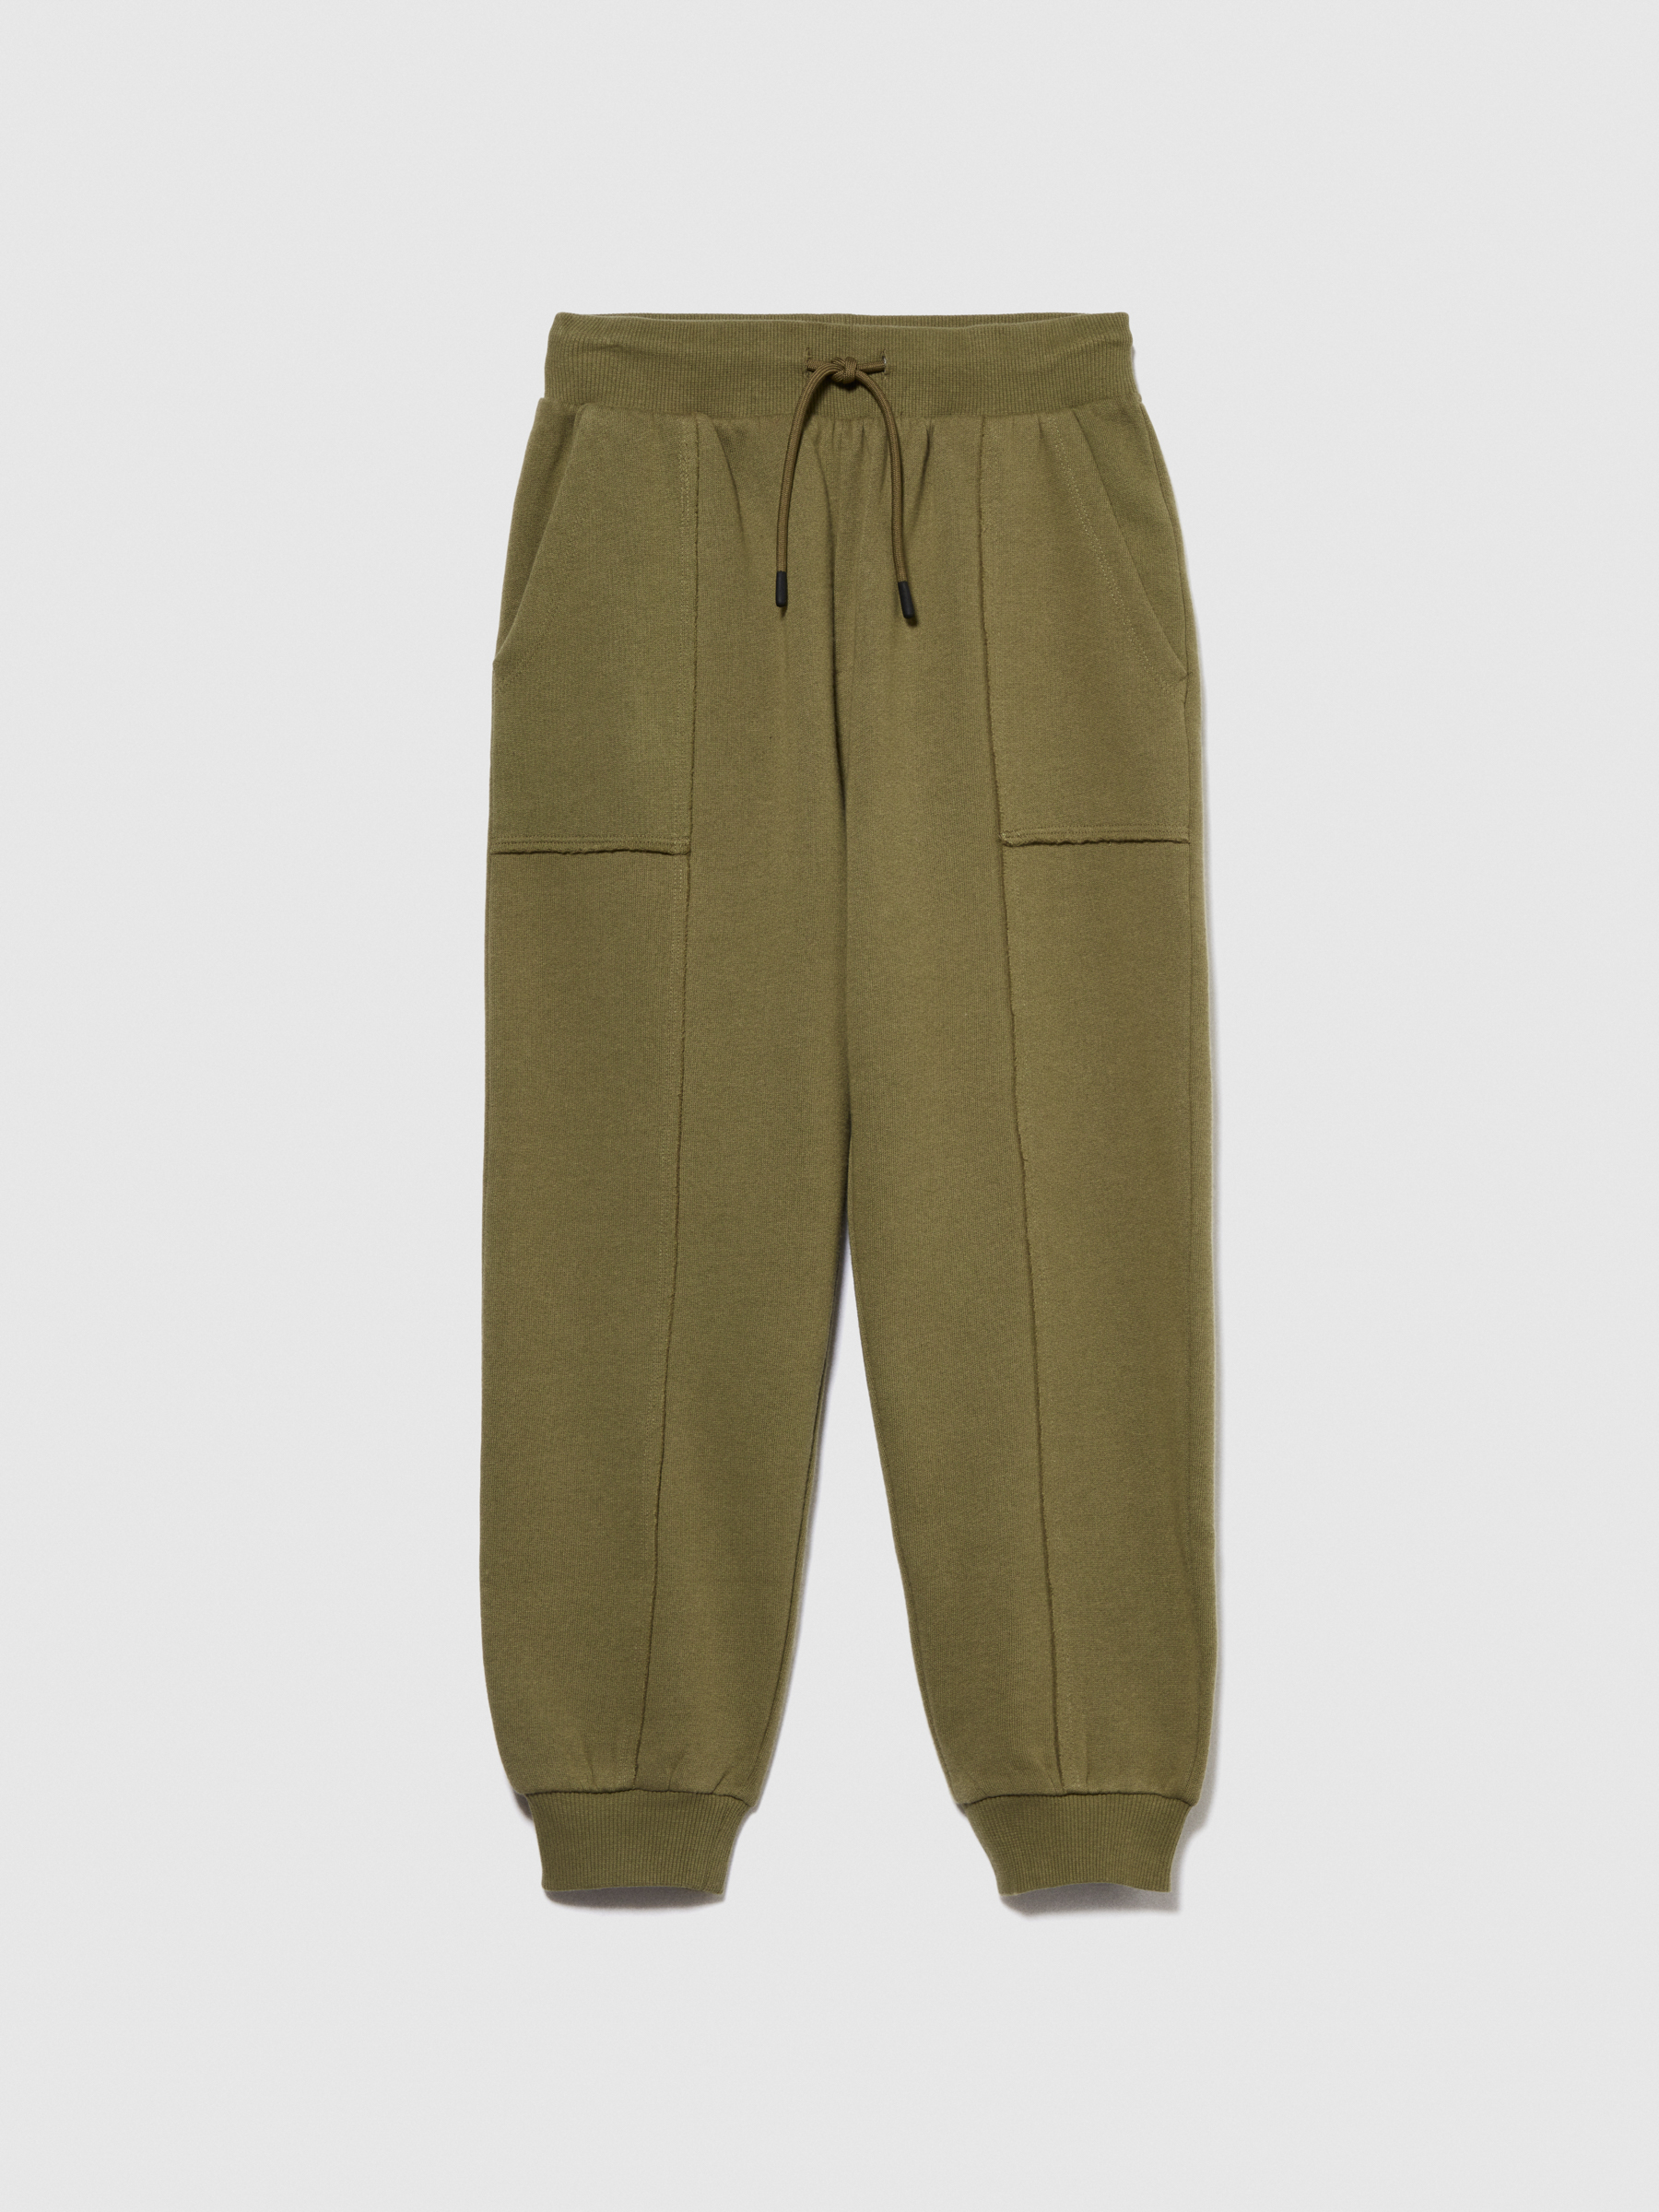 Sisley Young - Oversized Sweat Joggers, Man, Military Green, Size: M